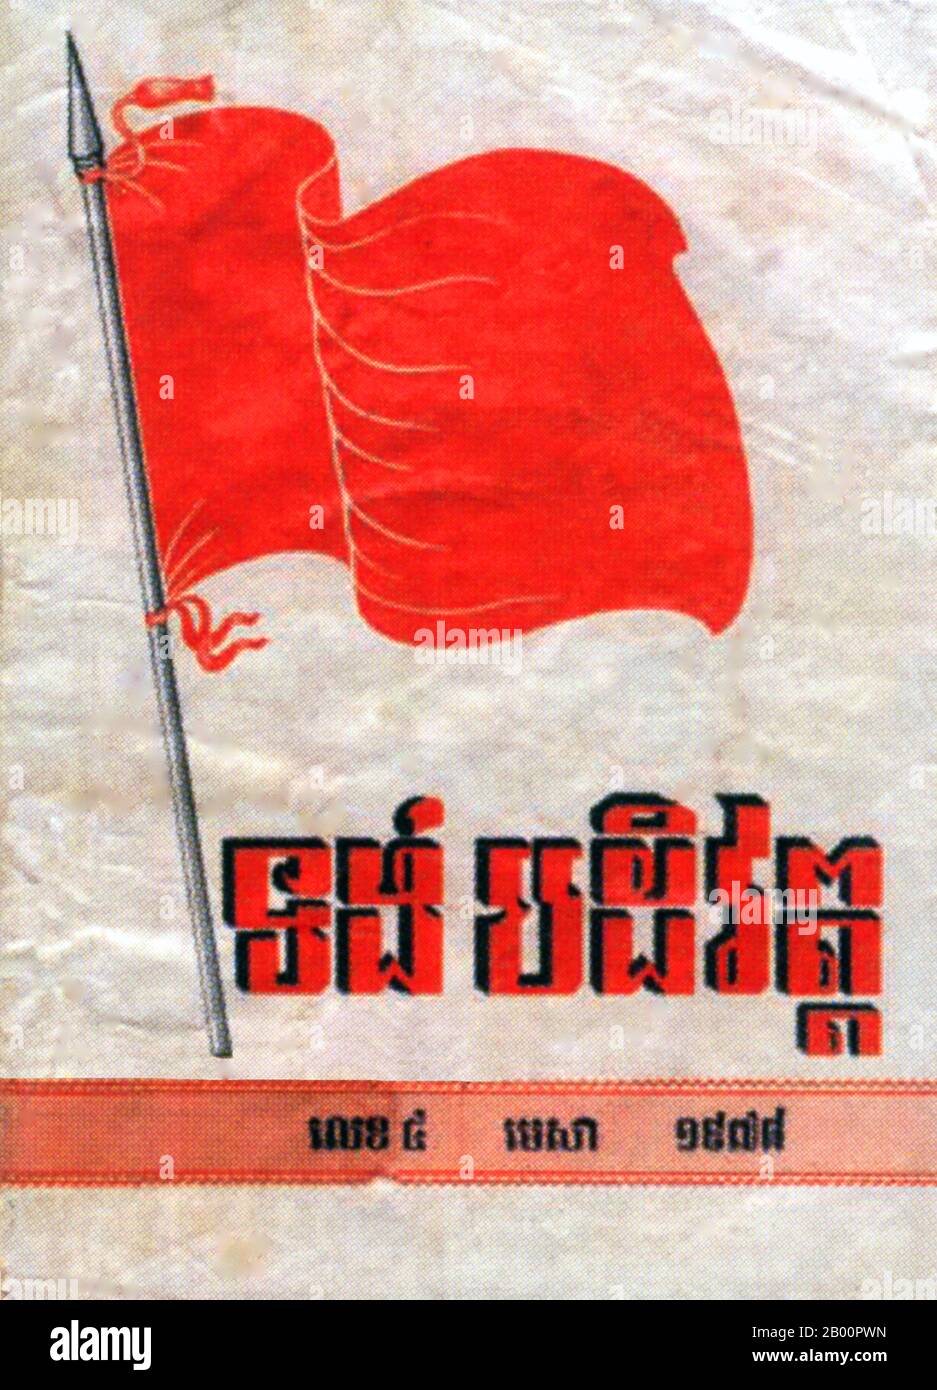 Cambodia: Front cover of an issue of Tung Padevat or 'Revolutuionary Flag', theoretical organ of the Communist Party of Kampuchea.  Tung Padevat (Revolutionary Flag) was a Khmer-language journal in Democratic Kampuchea. Tung Padevat was one of the theoretical organs of the Communist Party of Kampuchea. The first issue was published in January 1975. It was published monthly at least until September 1978. Circulation seems to have been restricted to senior party members. Stock Photo